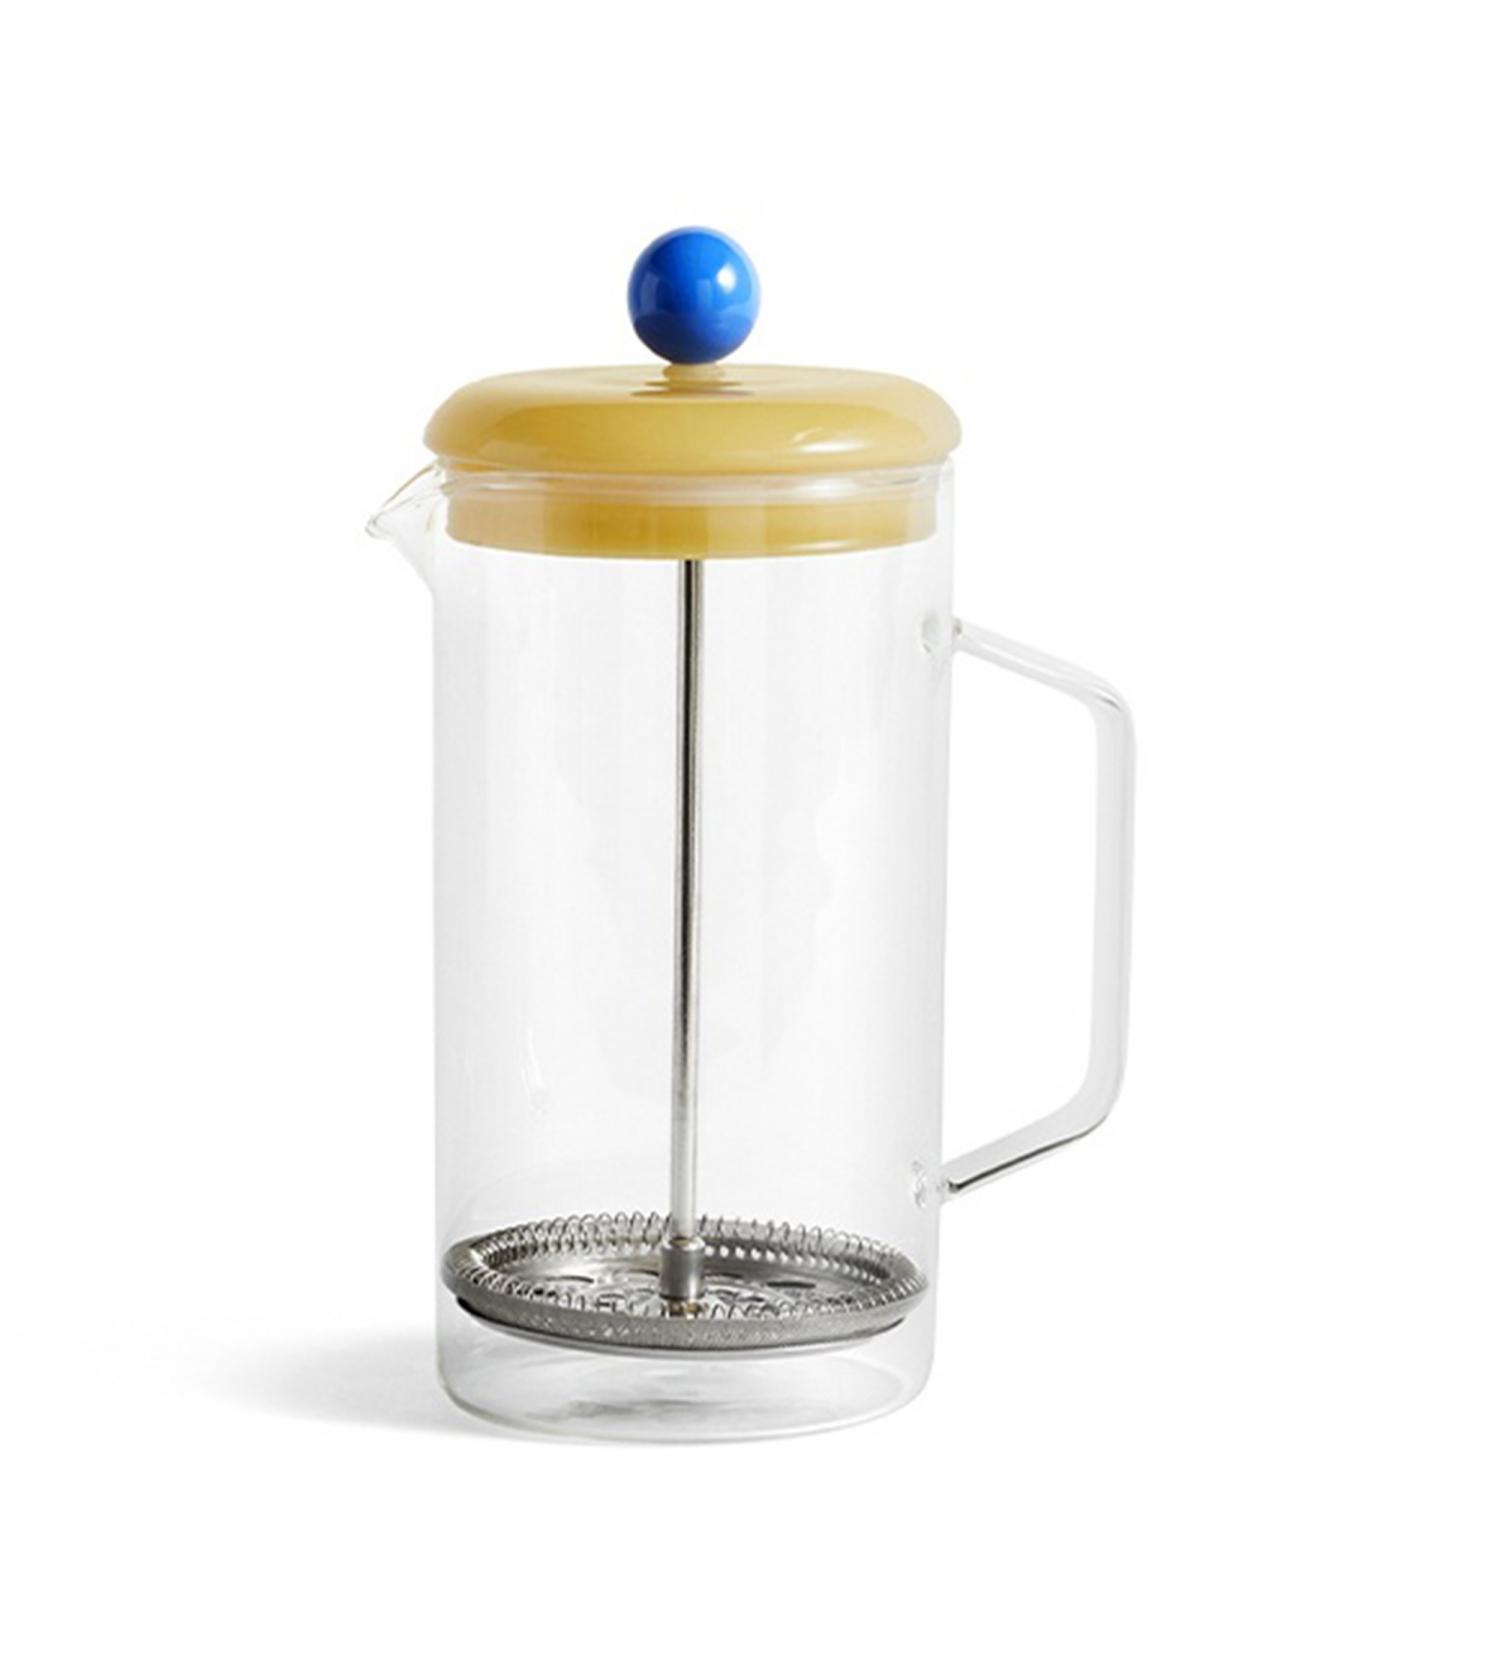 Infuseur French press brewer